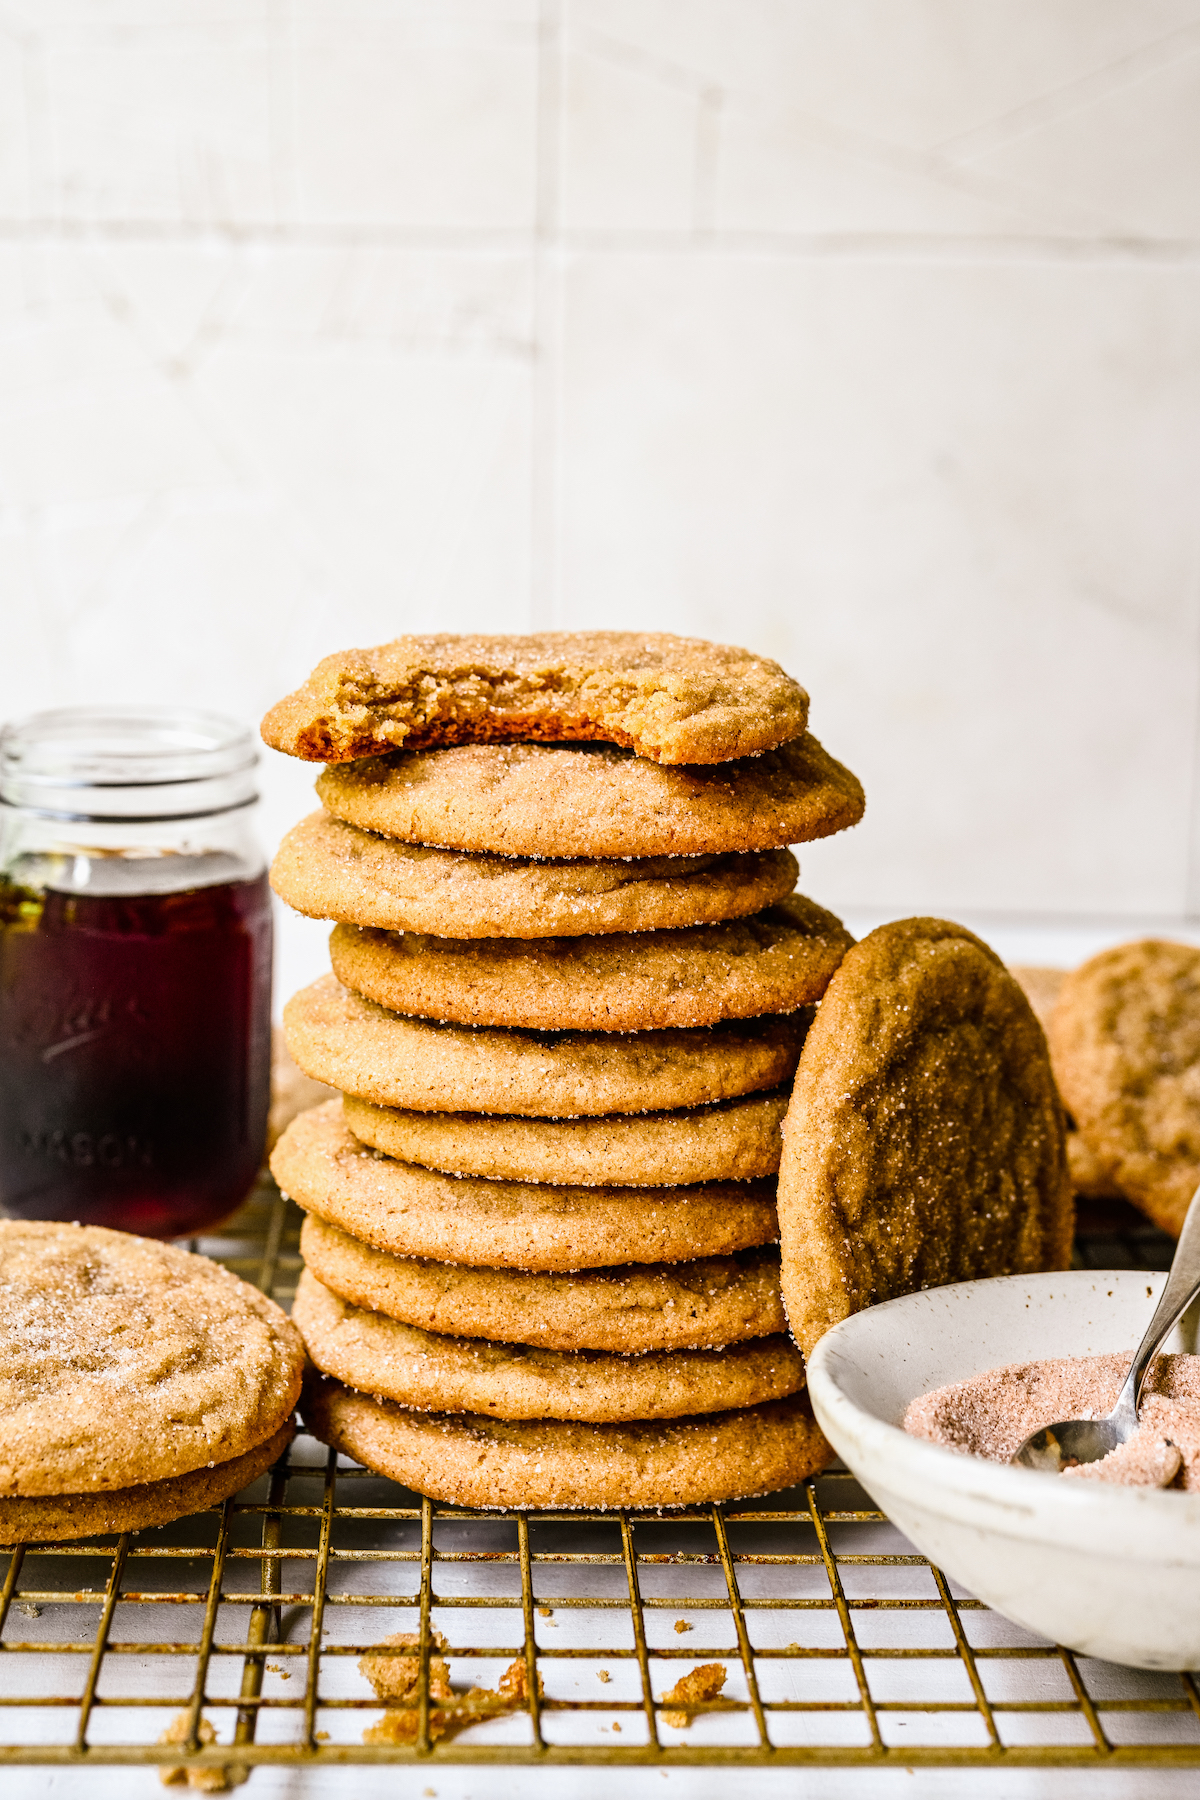 A stack of cookies. The cookie on top has had a bite taken from it, while another cookie is propped up against the stack. Maple syrup and cinnamon sugar are nearby on the wire rack.